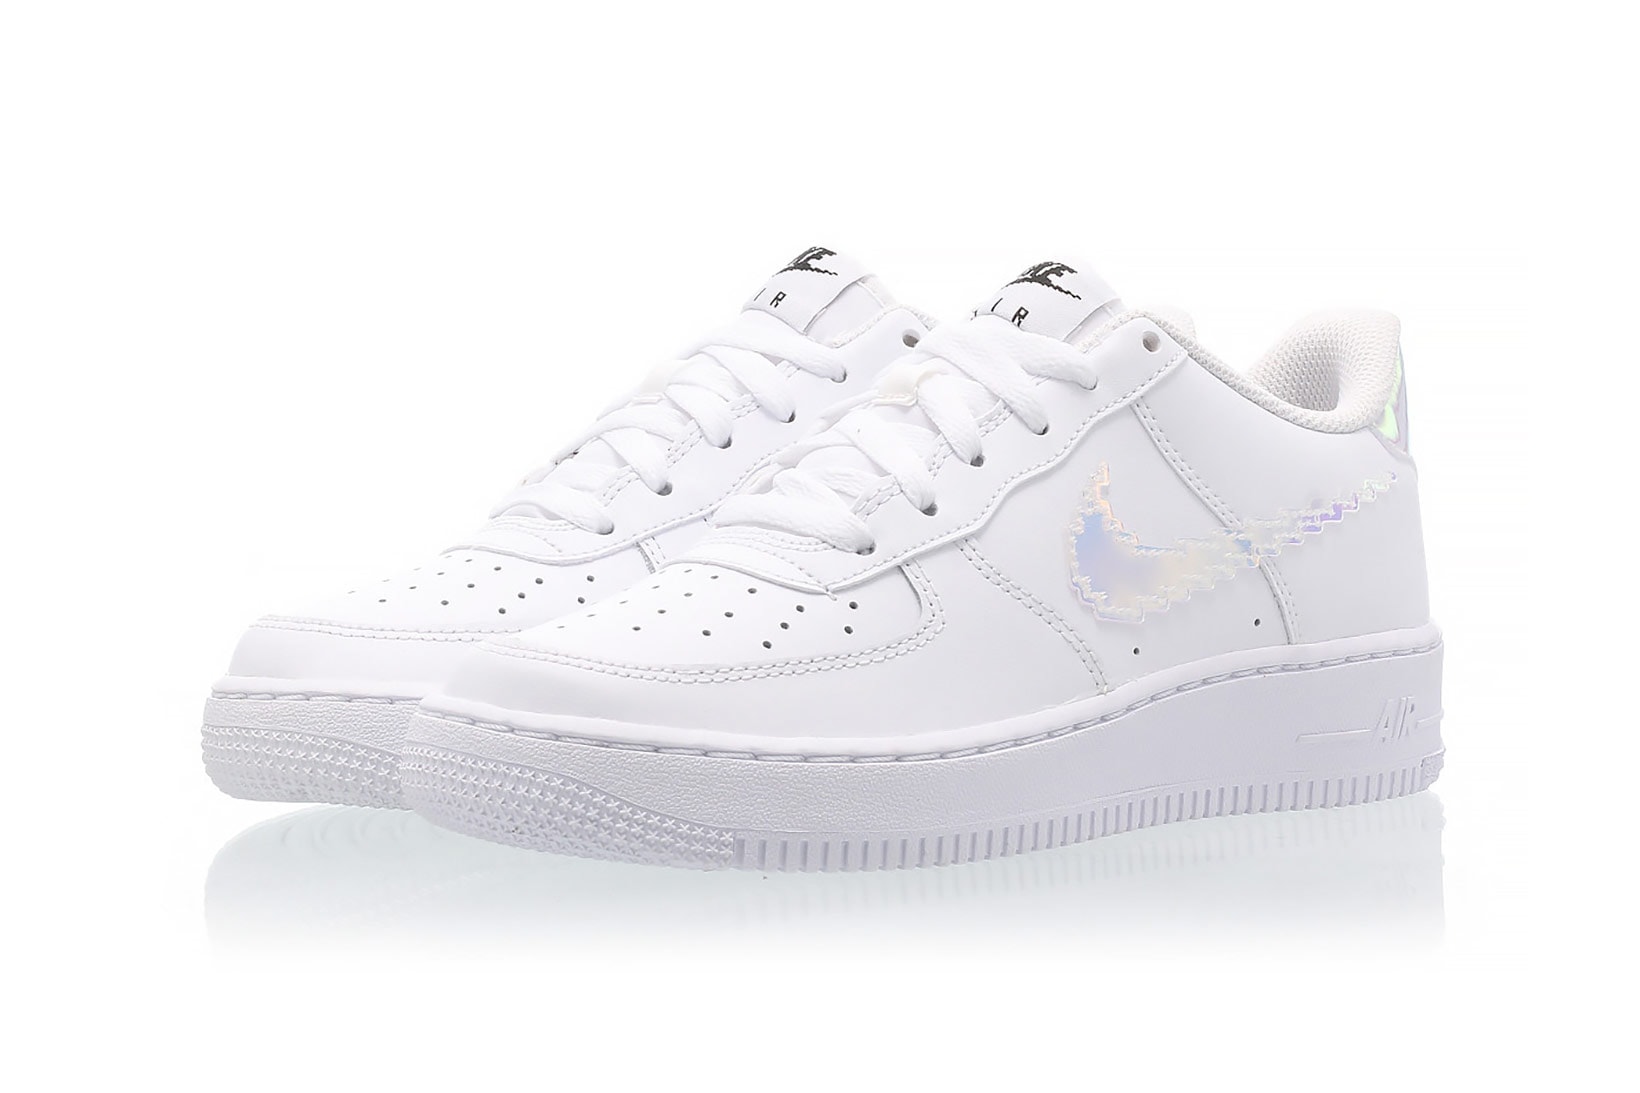 nike air force 1 af1 lv8 sneakers digital iridescent swoosh white colorway footwear shoes lateral laces front